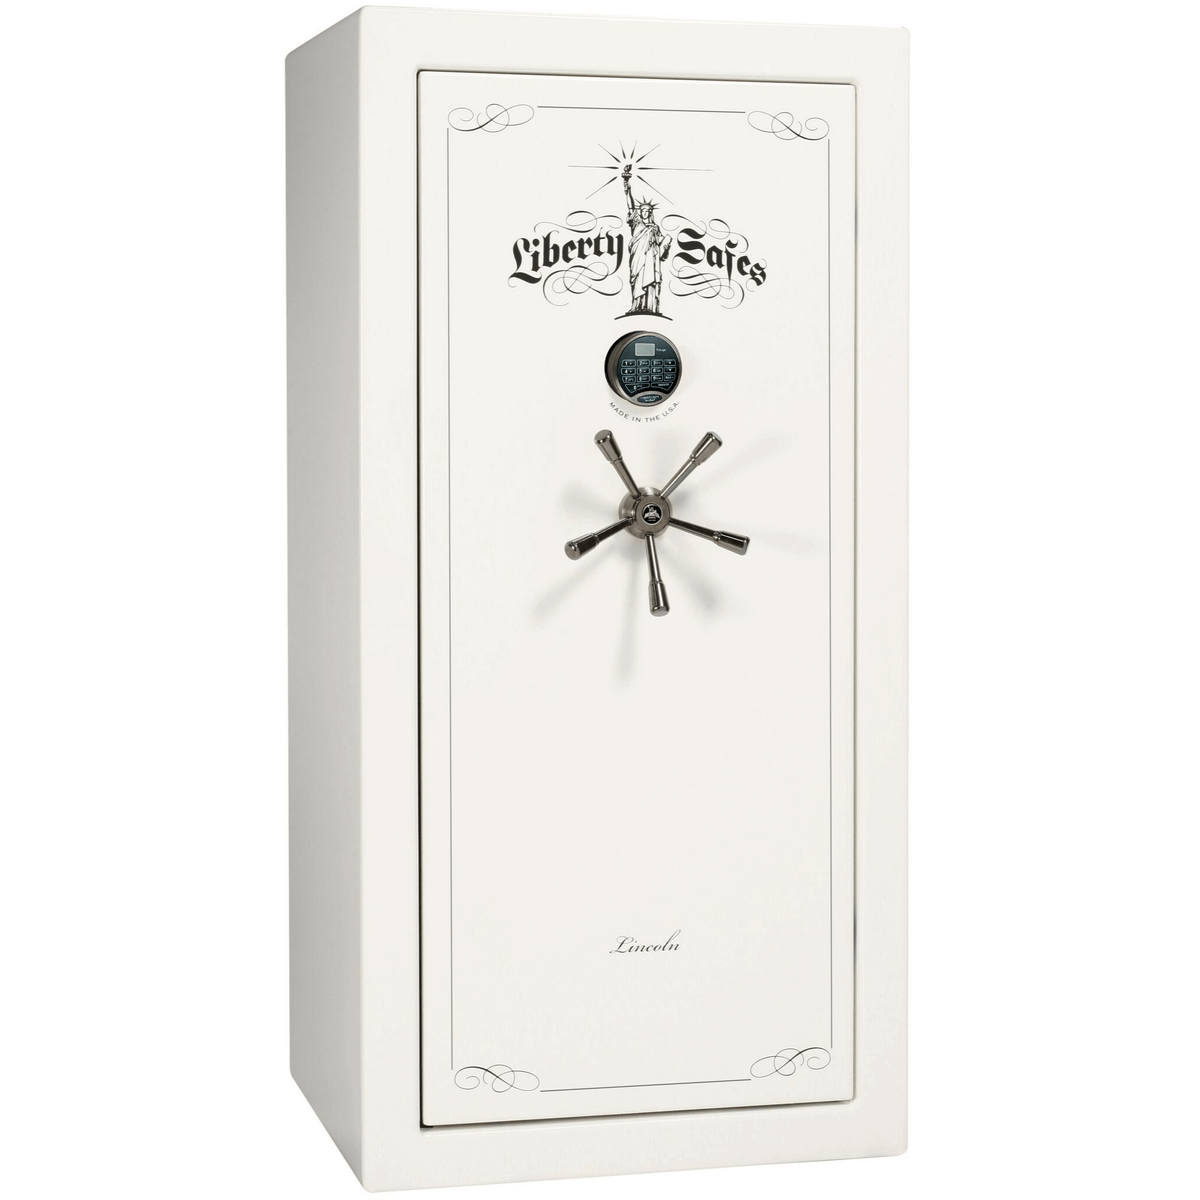 Liberty Lincoln 25 Safe in White Gloss with Black Chrome Electronic Lock.